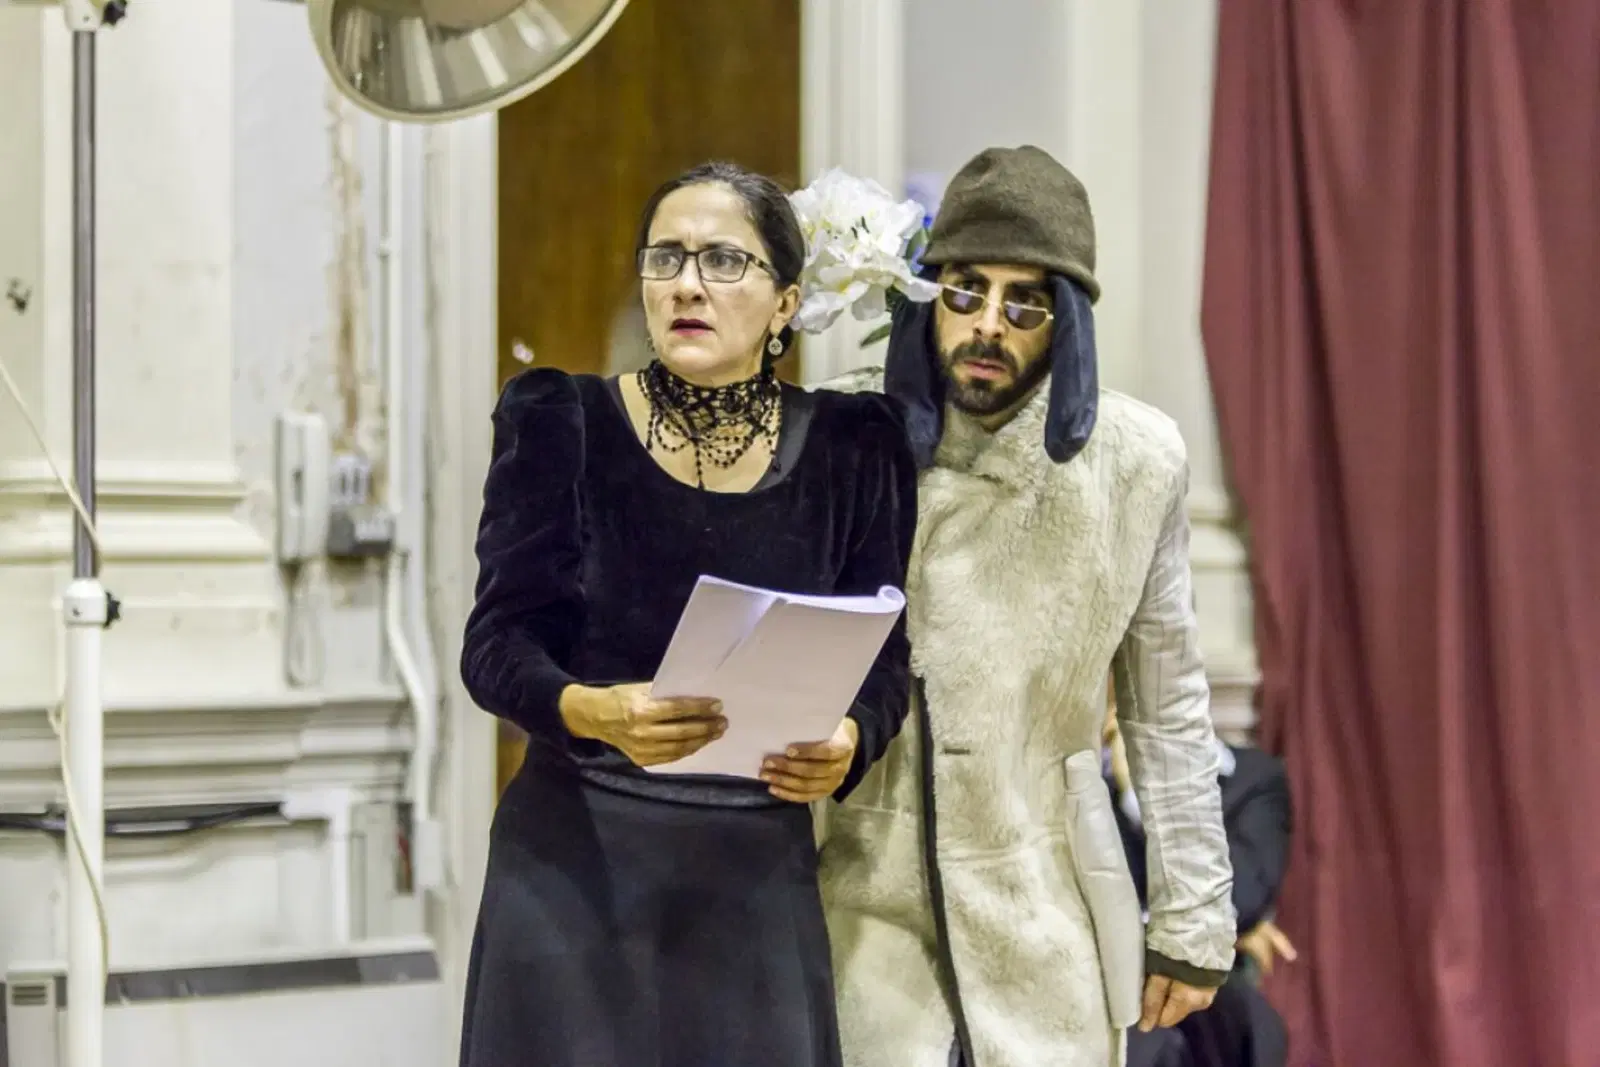 A duo performing a dramatic reading or act on stage, with the woman dressed in black and holding papers, alongside a man in a quirky hat and sunglasses, seemingly immersed in their roles.